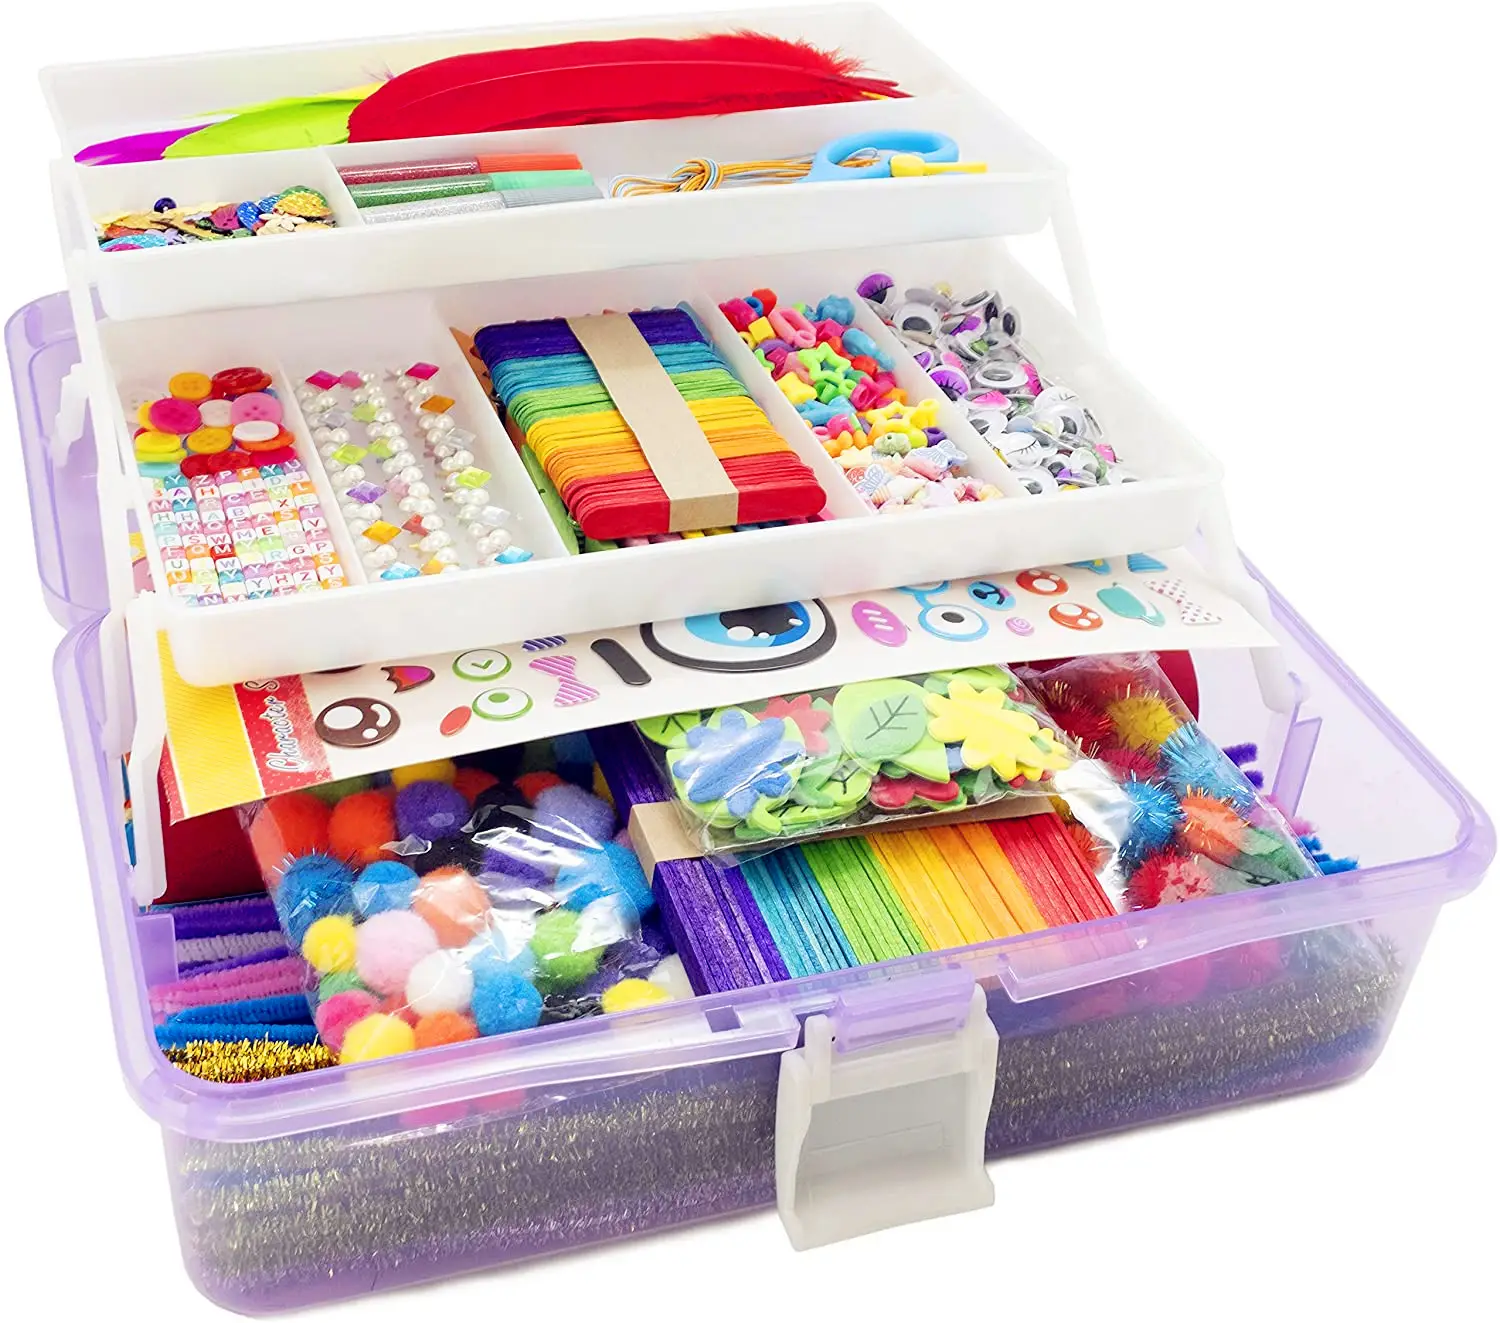 All in One DIY Craft Kit with triple layers folding box kids art sets 1000 +Pieces Giftable for kids & Toddlers